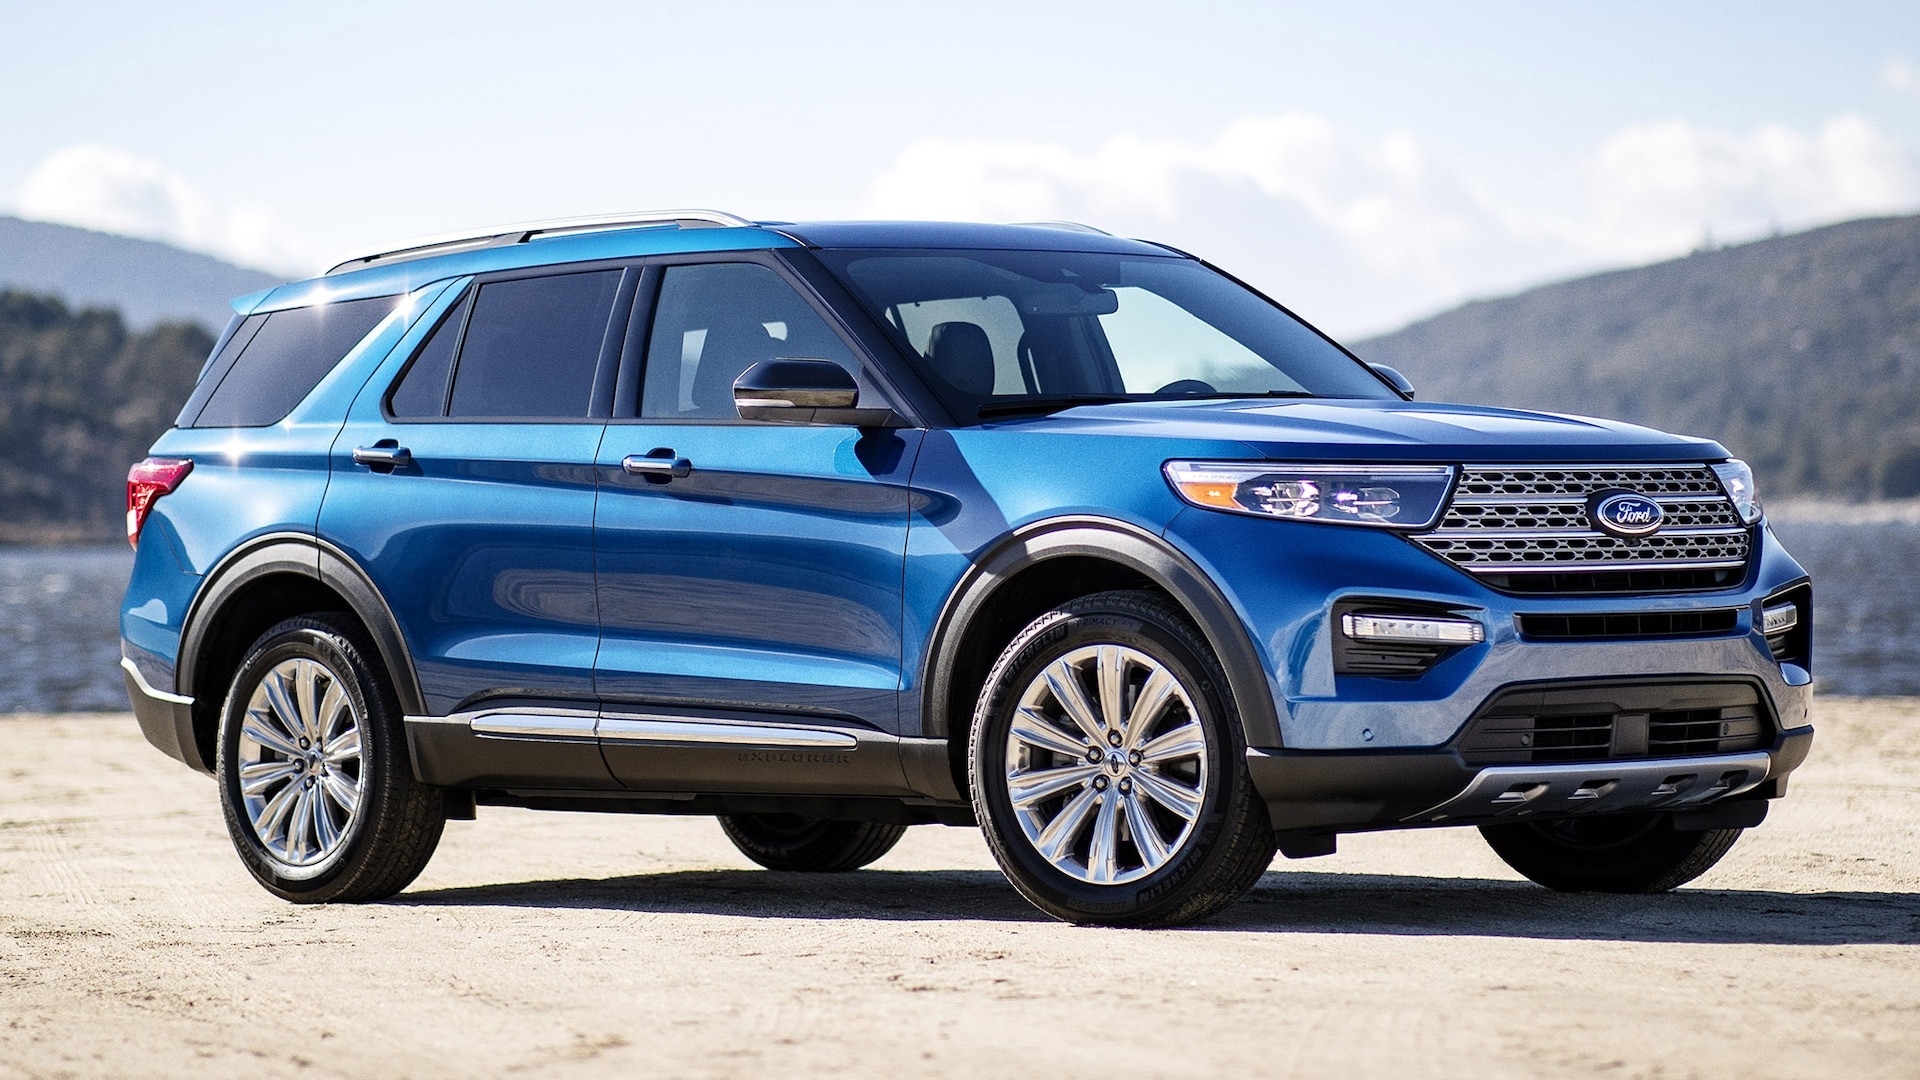 Ford Explorer, Hybrid efficiency, Advanced safety features, Cutting-edge technology, 1920x1080 Full HD Desktop